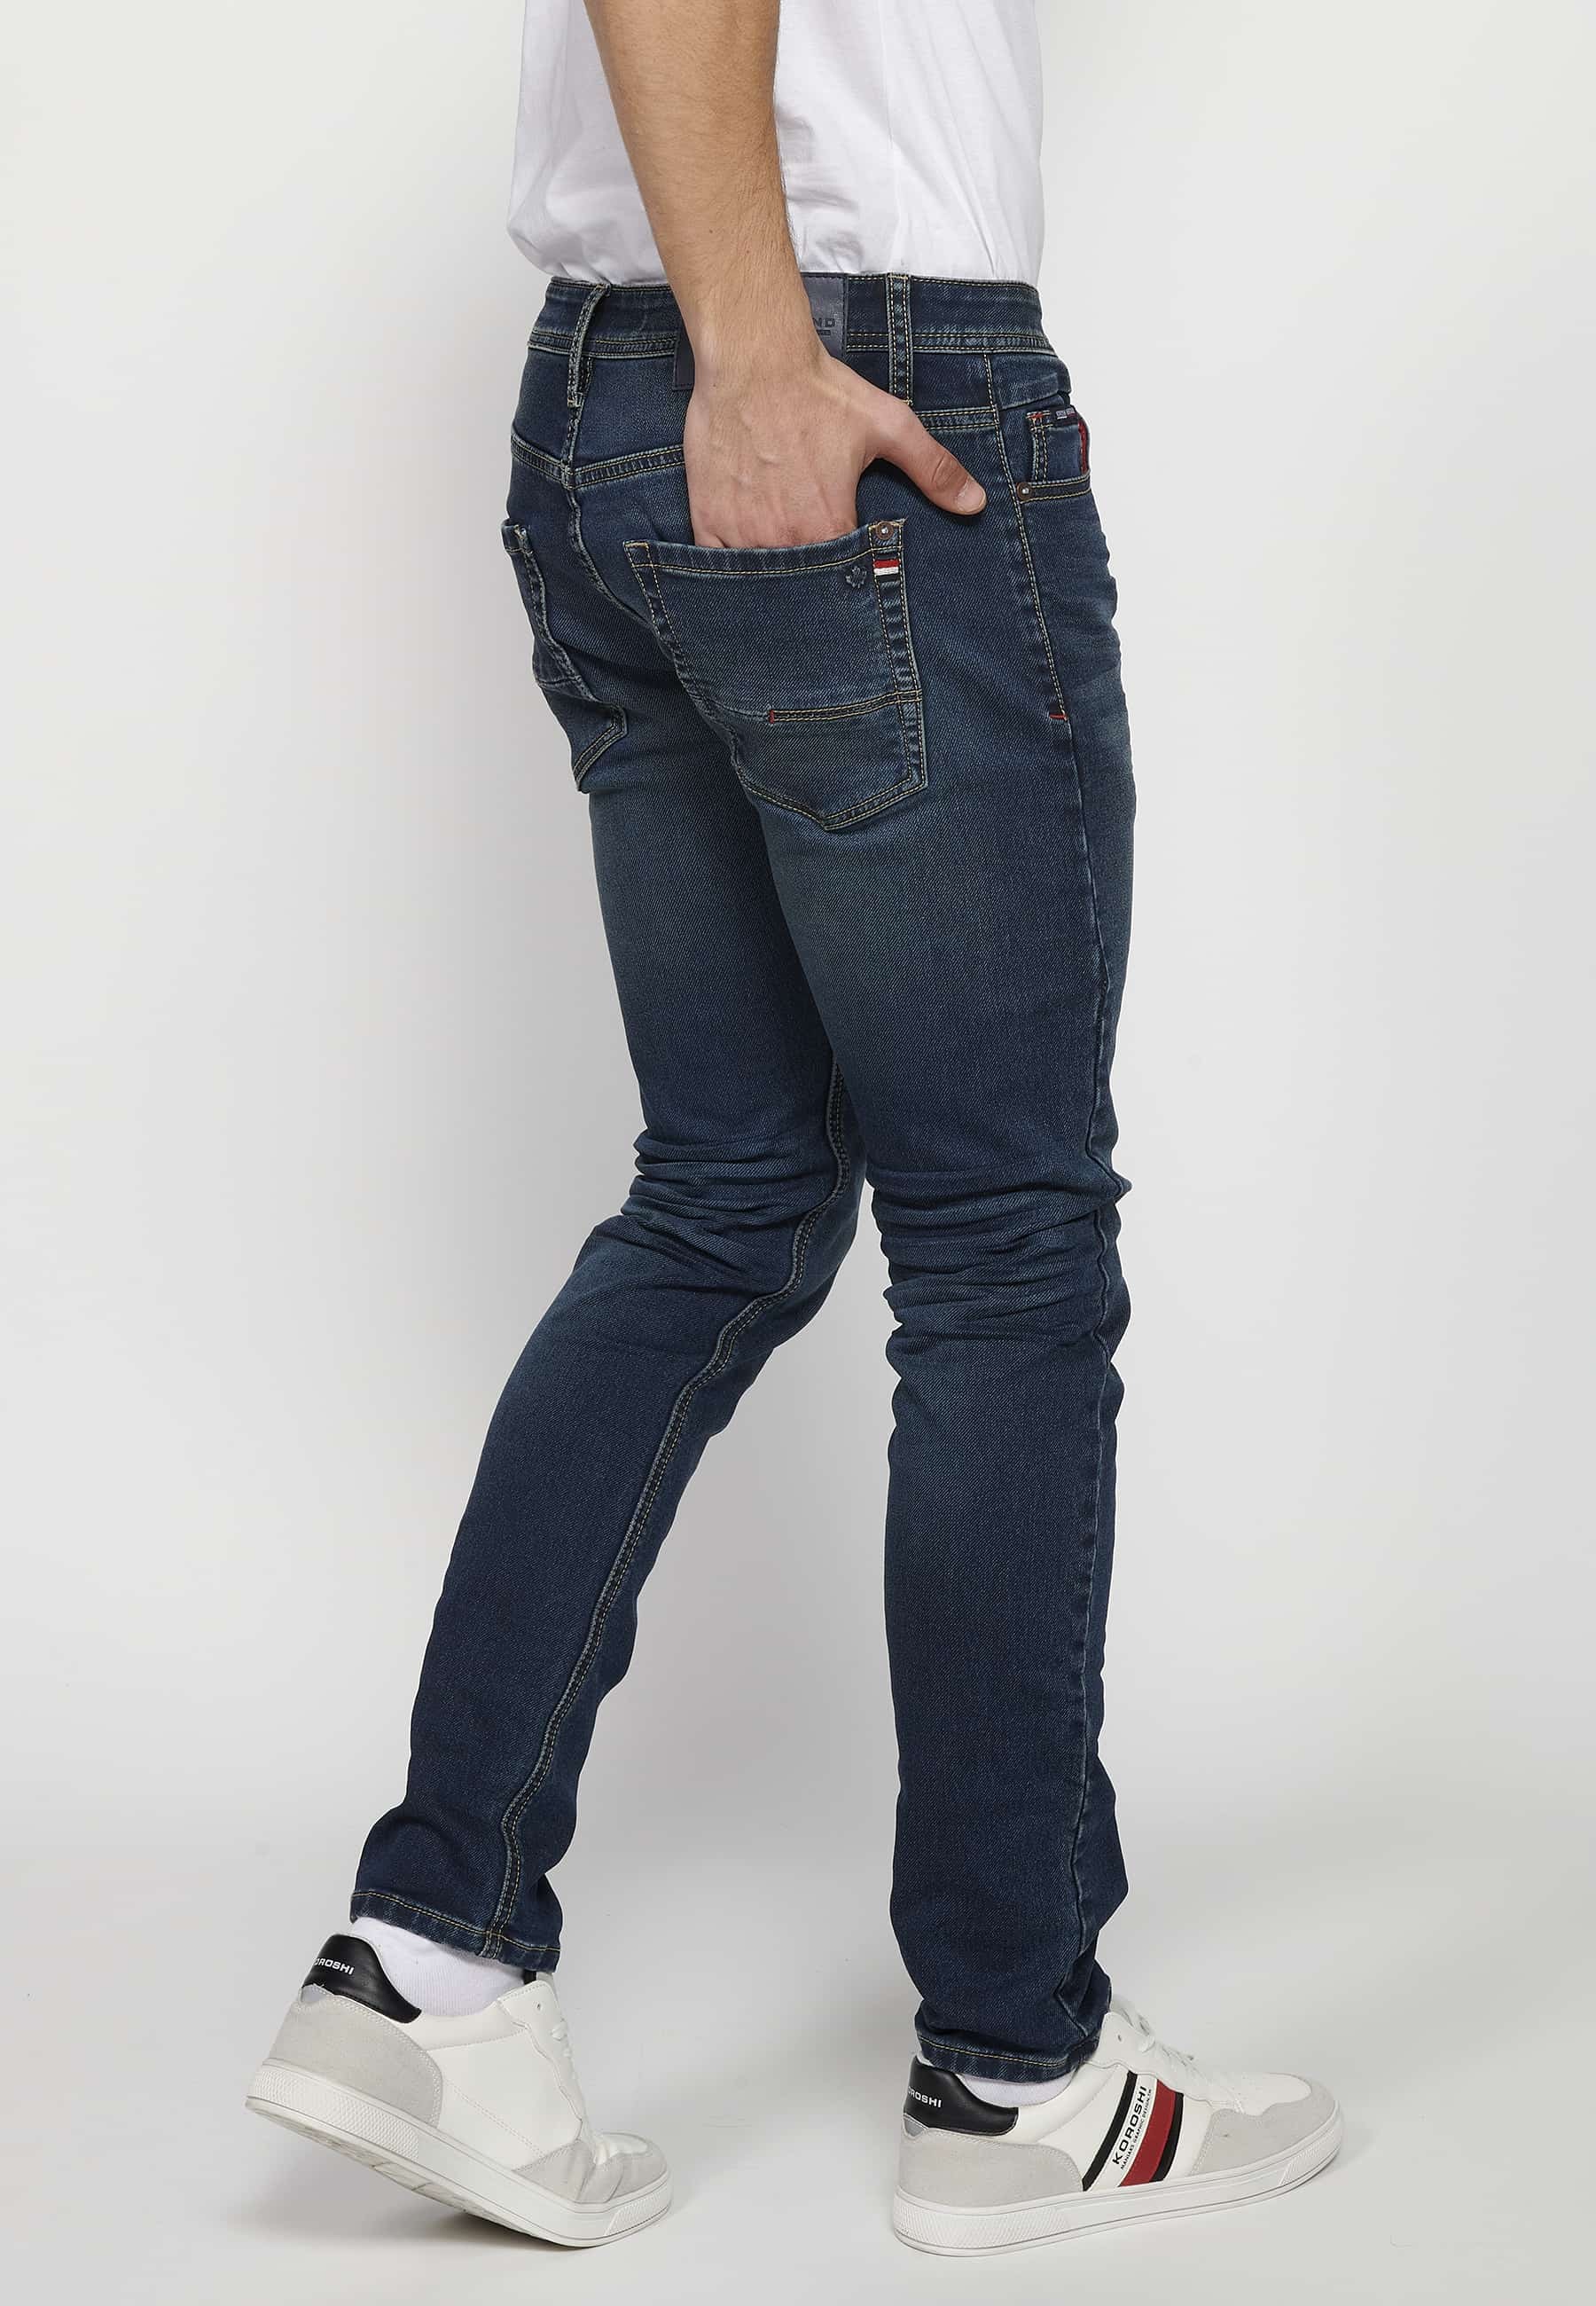 Slim fit long jeans with front zipper and button closure with five pockets, one blue pocket pocket for Men 5